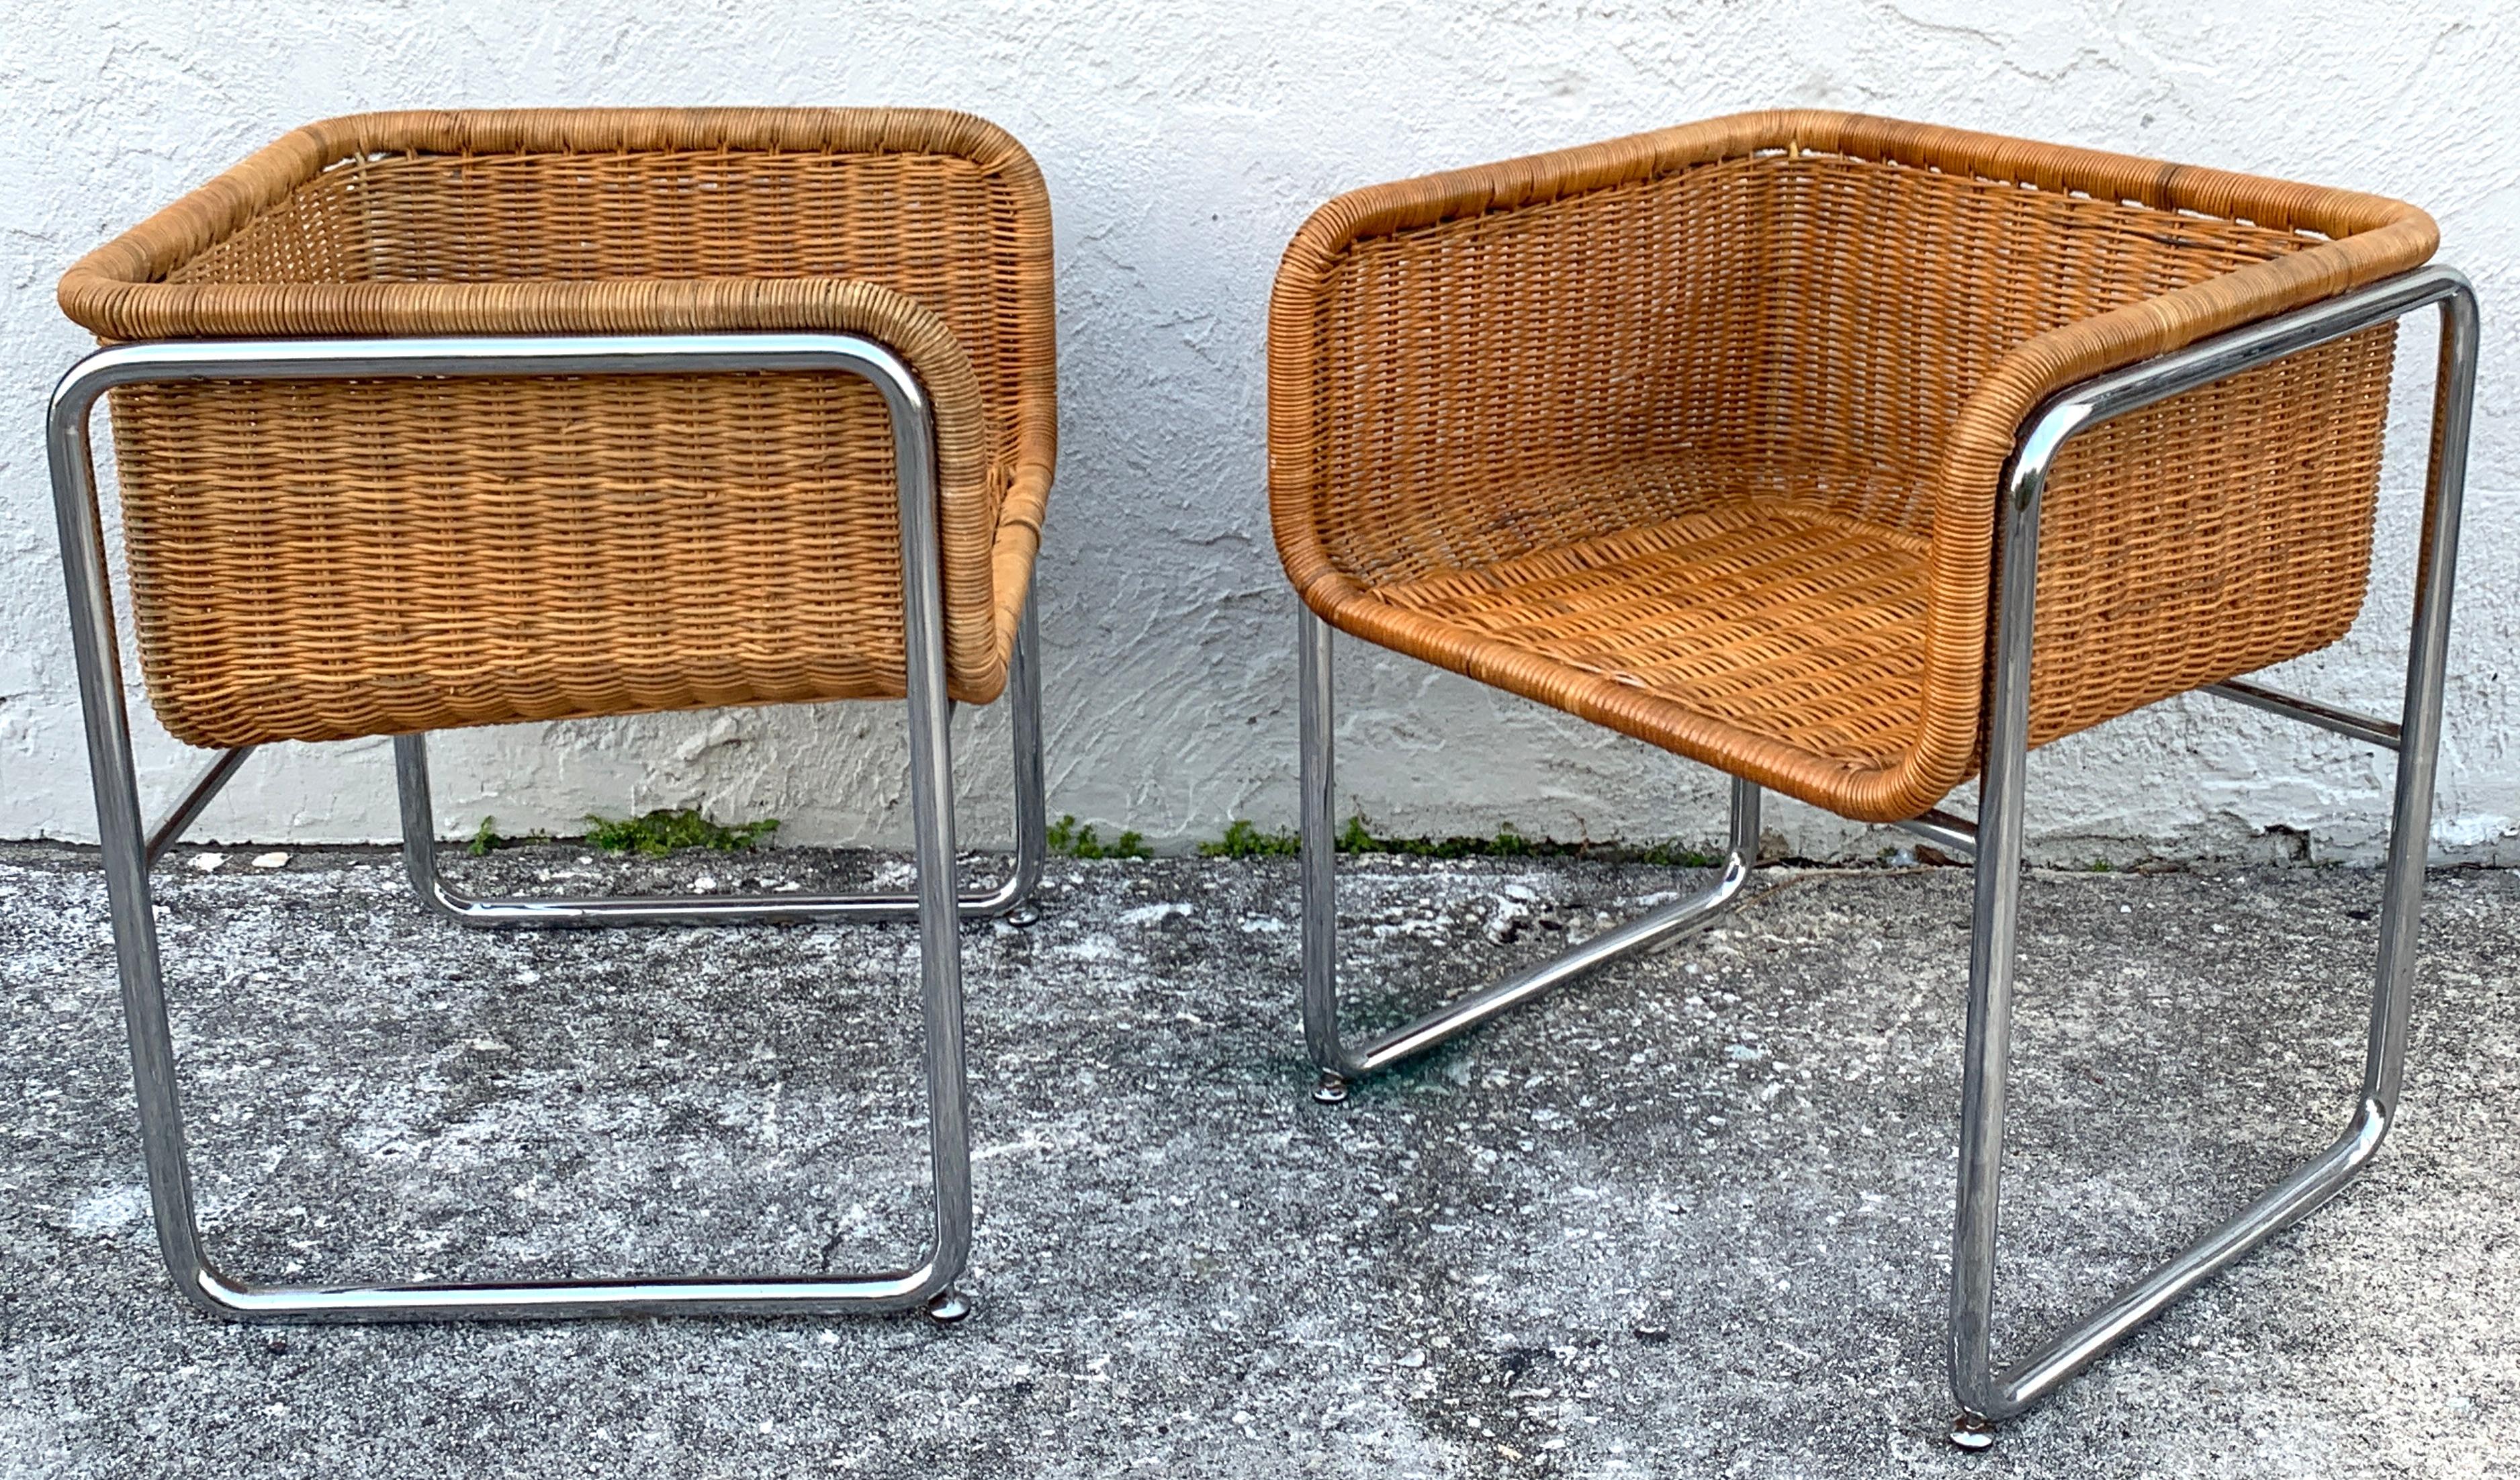 Large pair of 1970s chrome and rattan cube club chairs, great size and color, architectural chrome frames, sturdy chairs. Ready for an 18